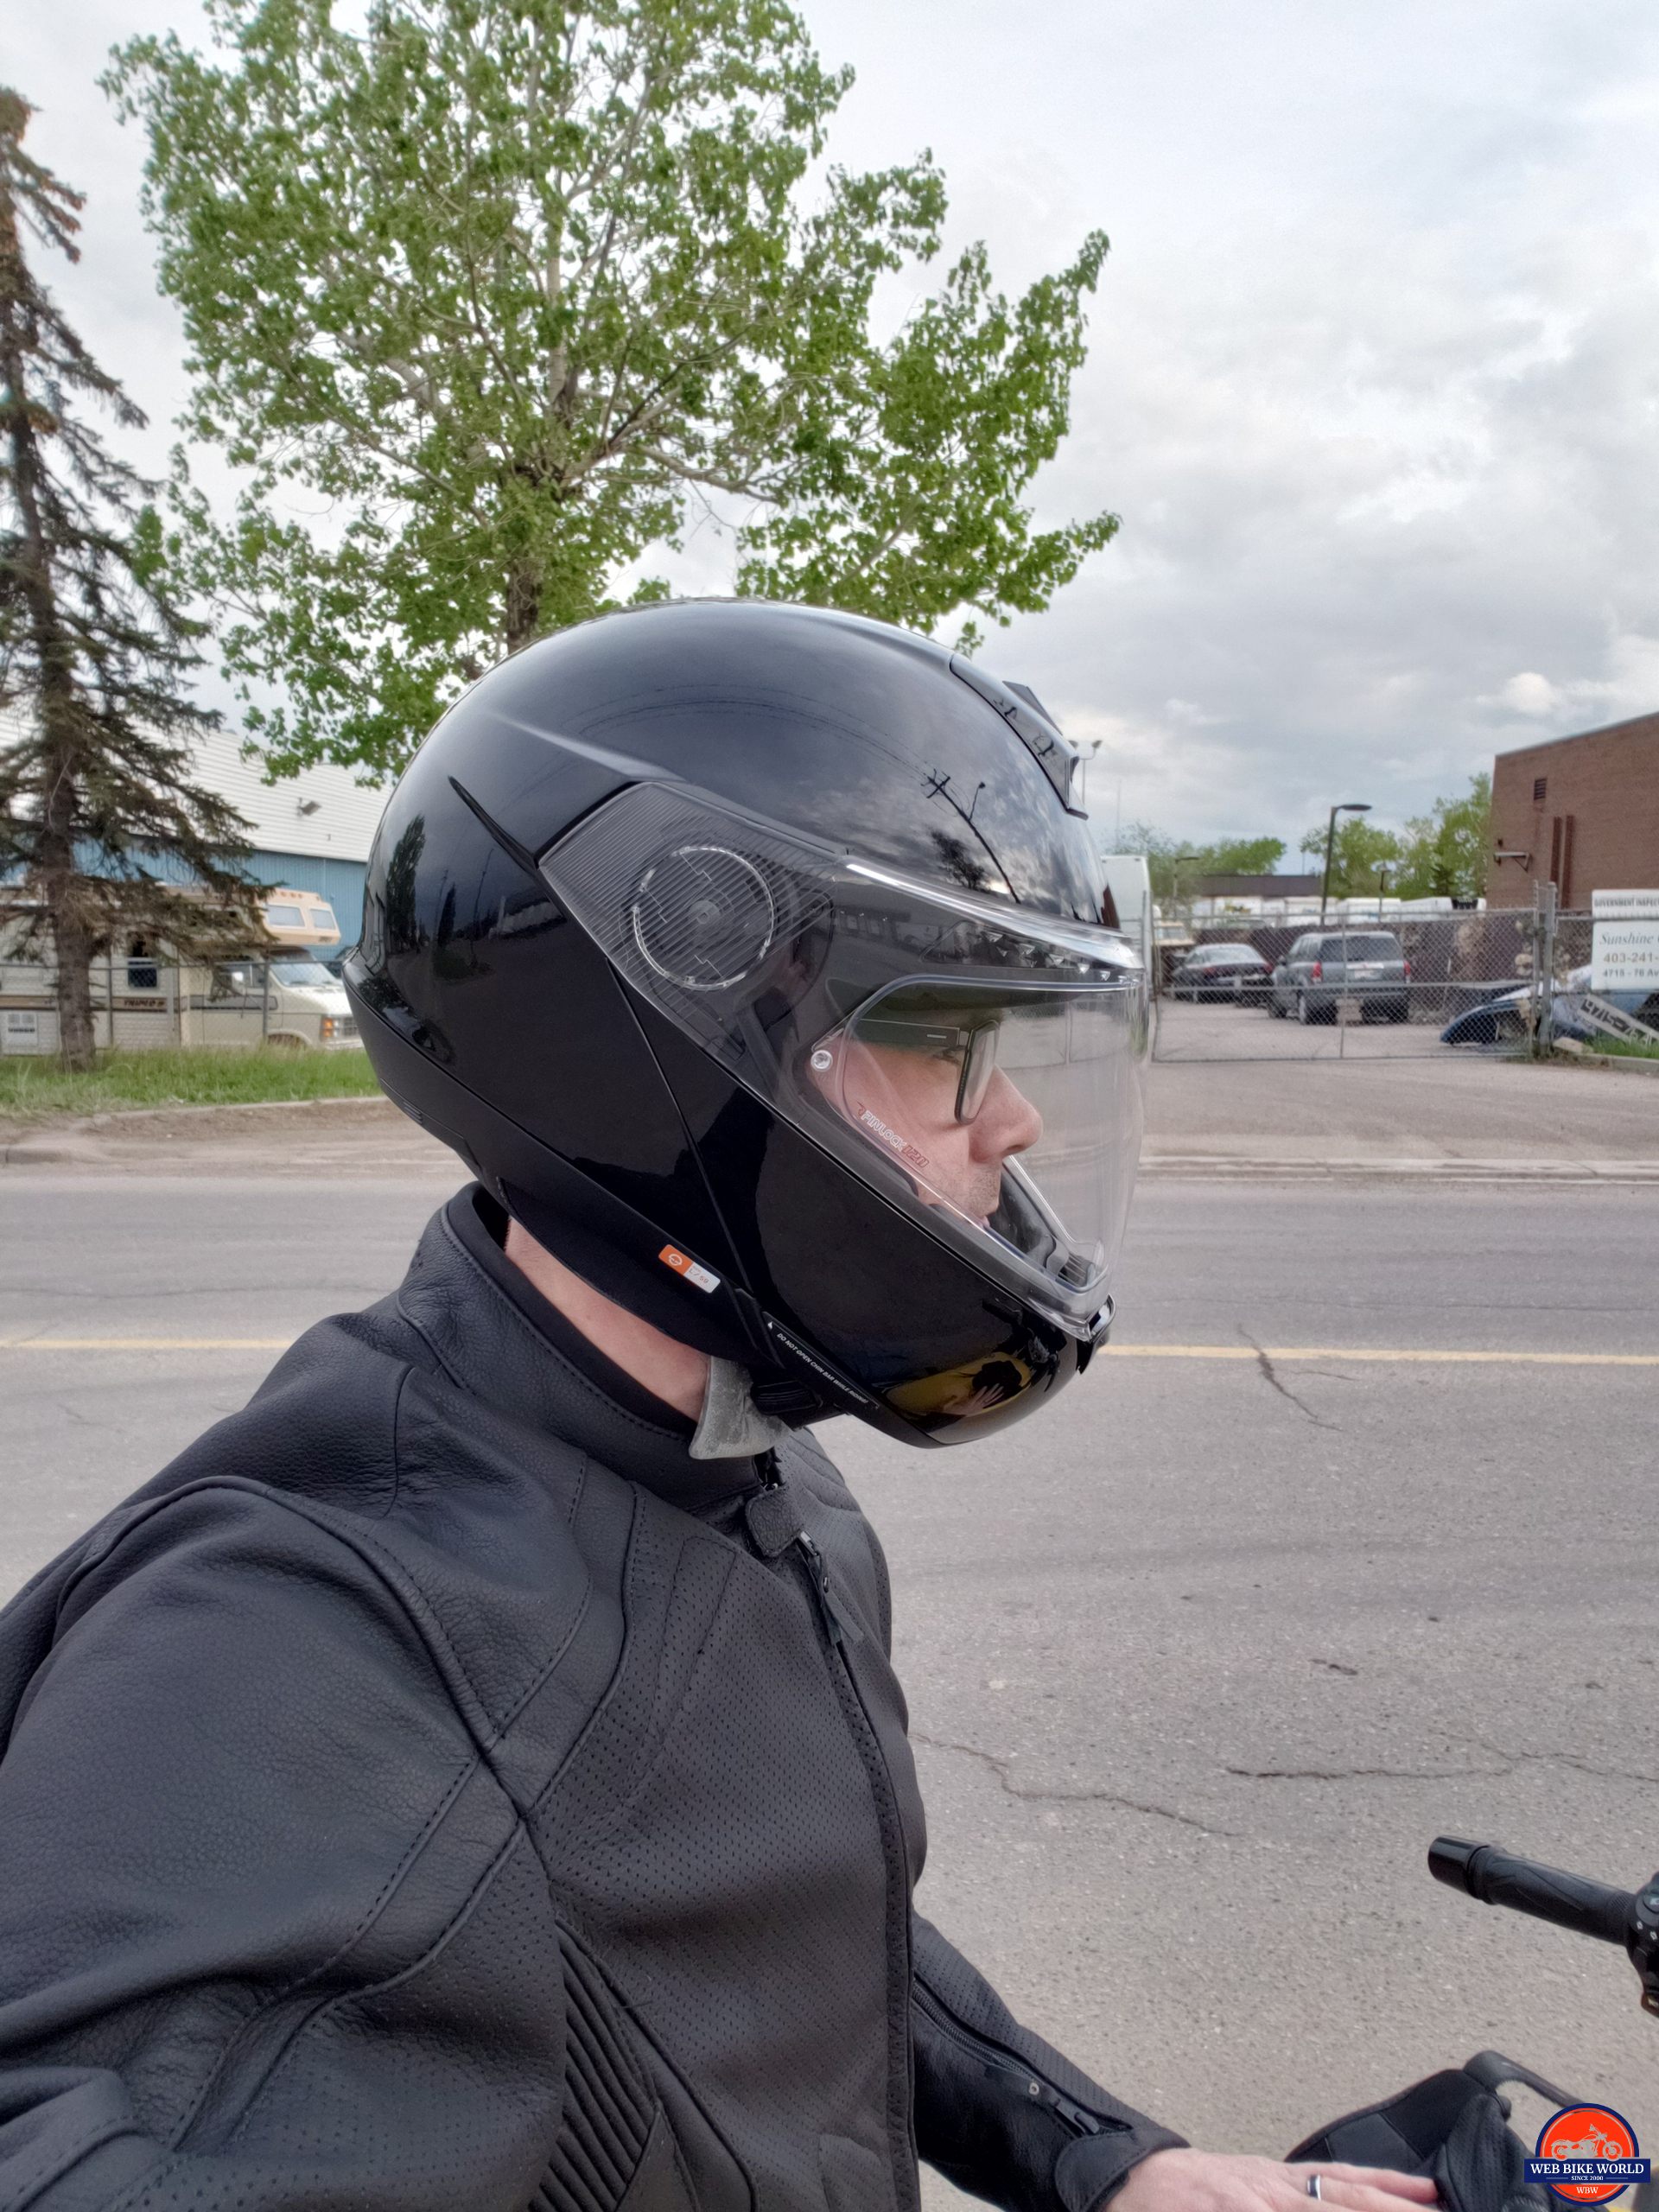 SCHUBERTH C4 Pro, side profile view, worn by Cameron Martel